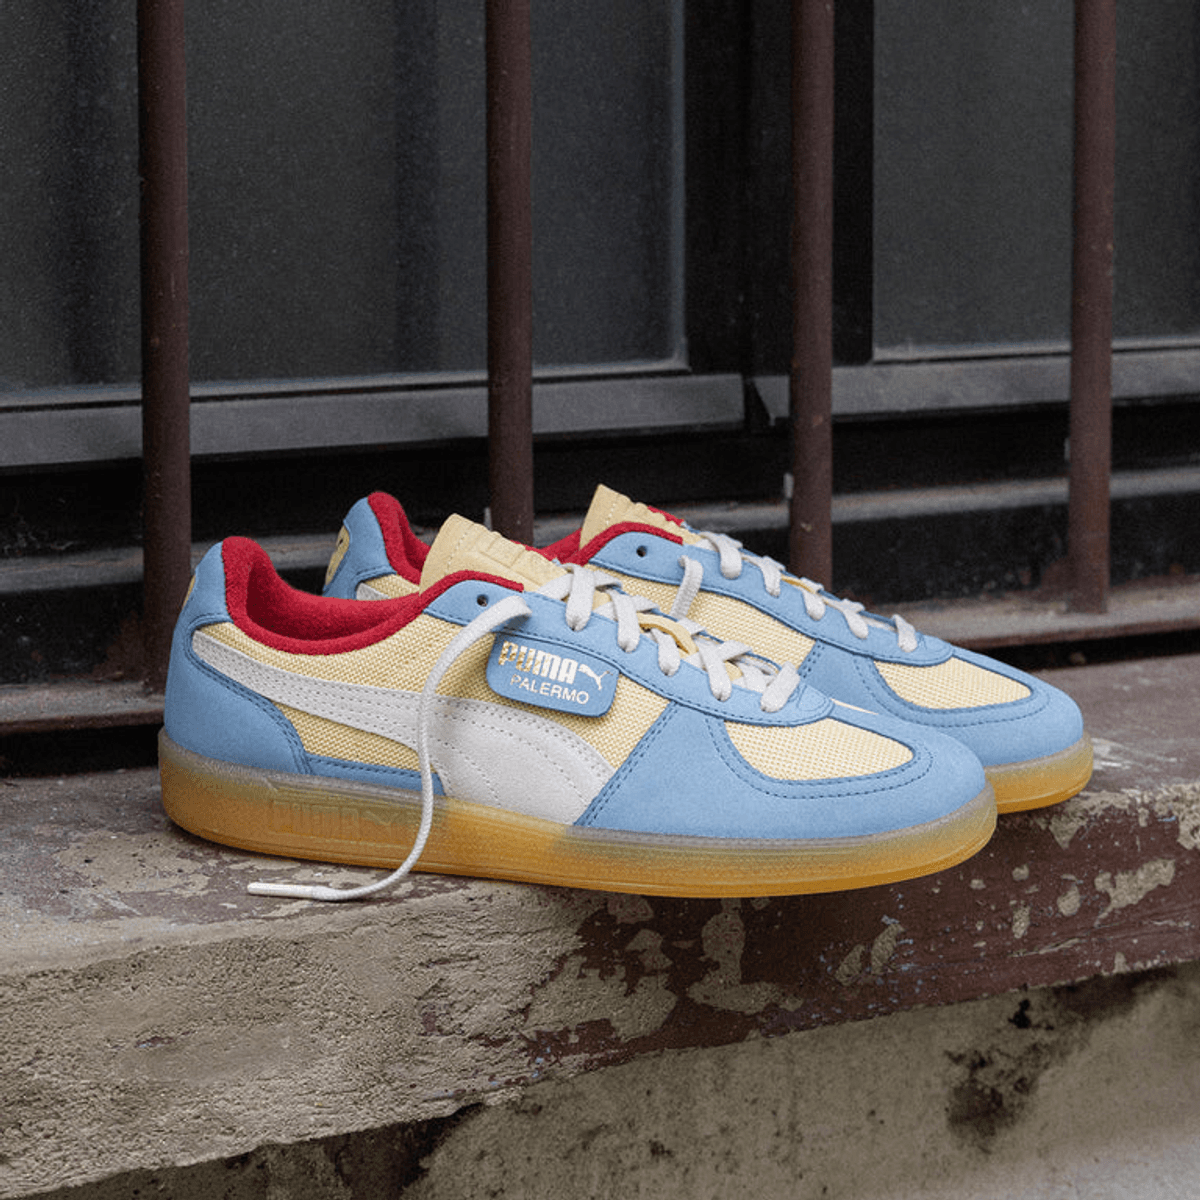 The Asphaltgold x PUMA Palermo “Scopa” Releases May 2024